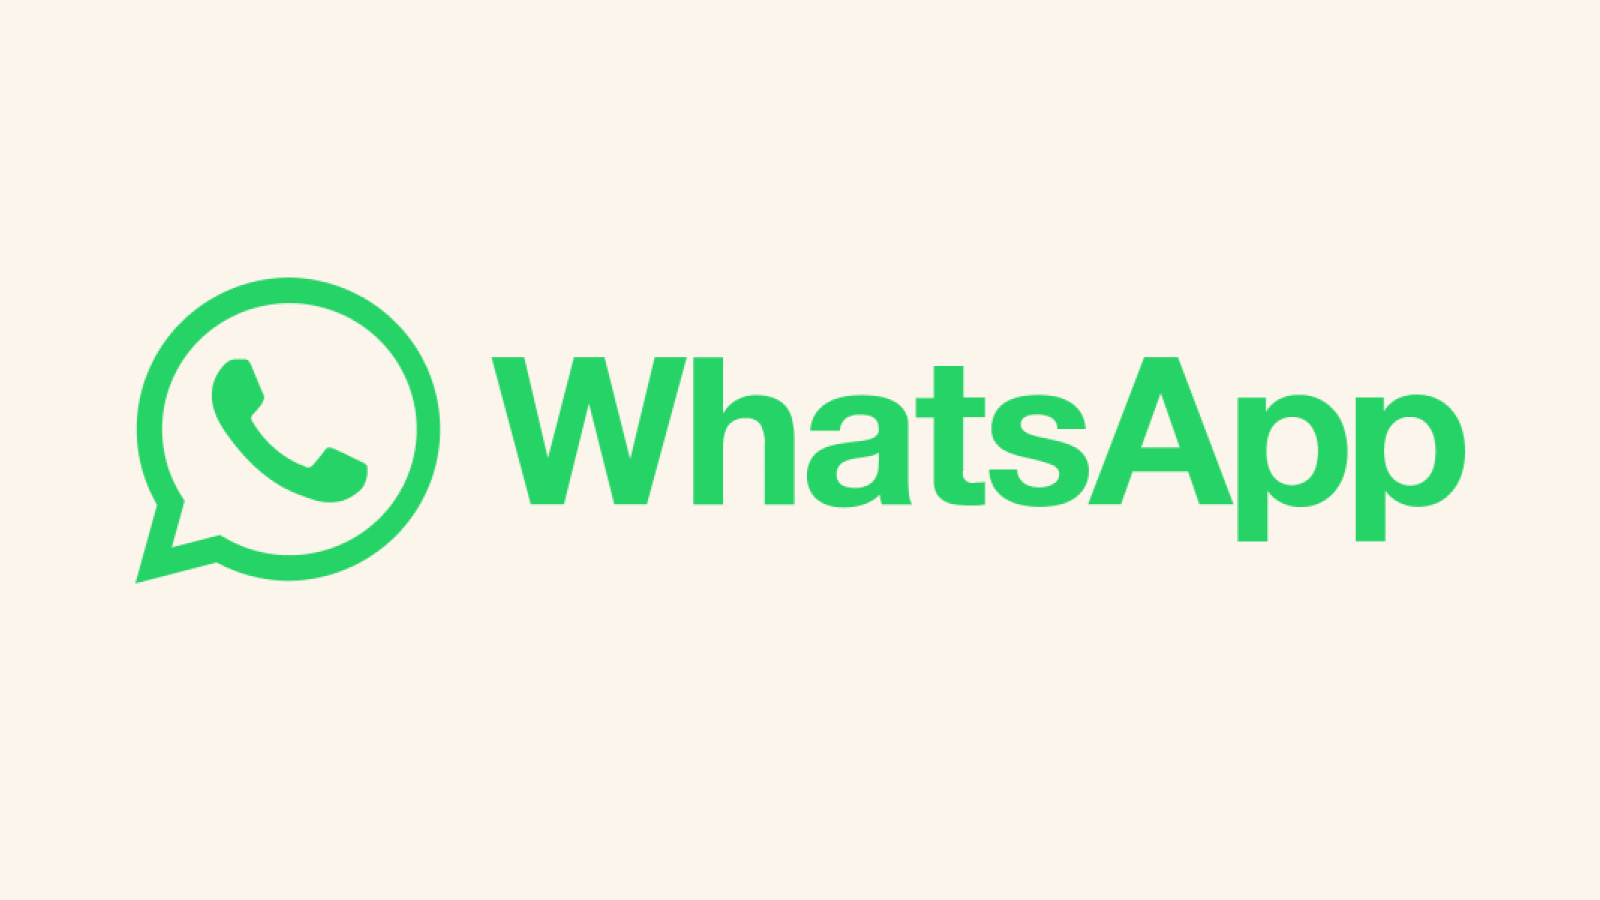 WhatsApp’s Next Move: Embracing Third-Party Chat Partnerships